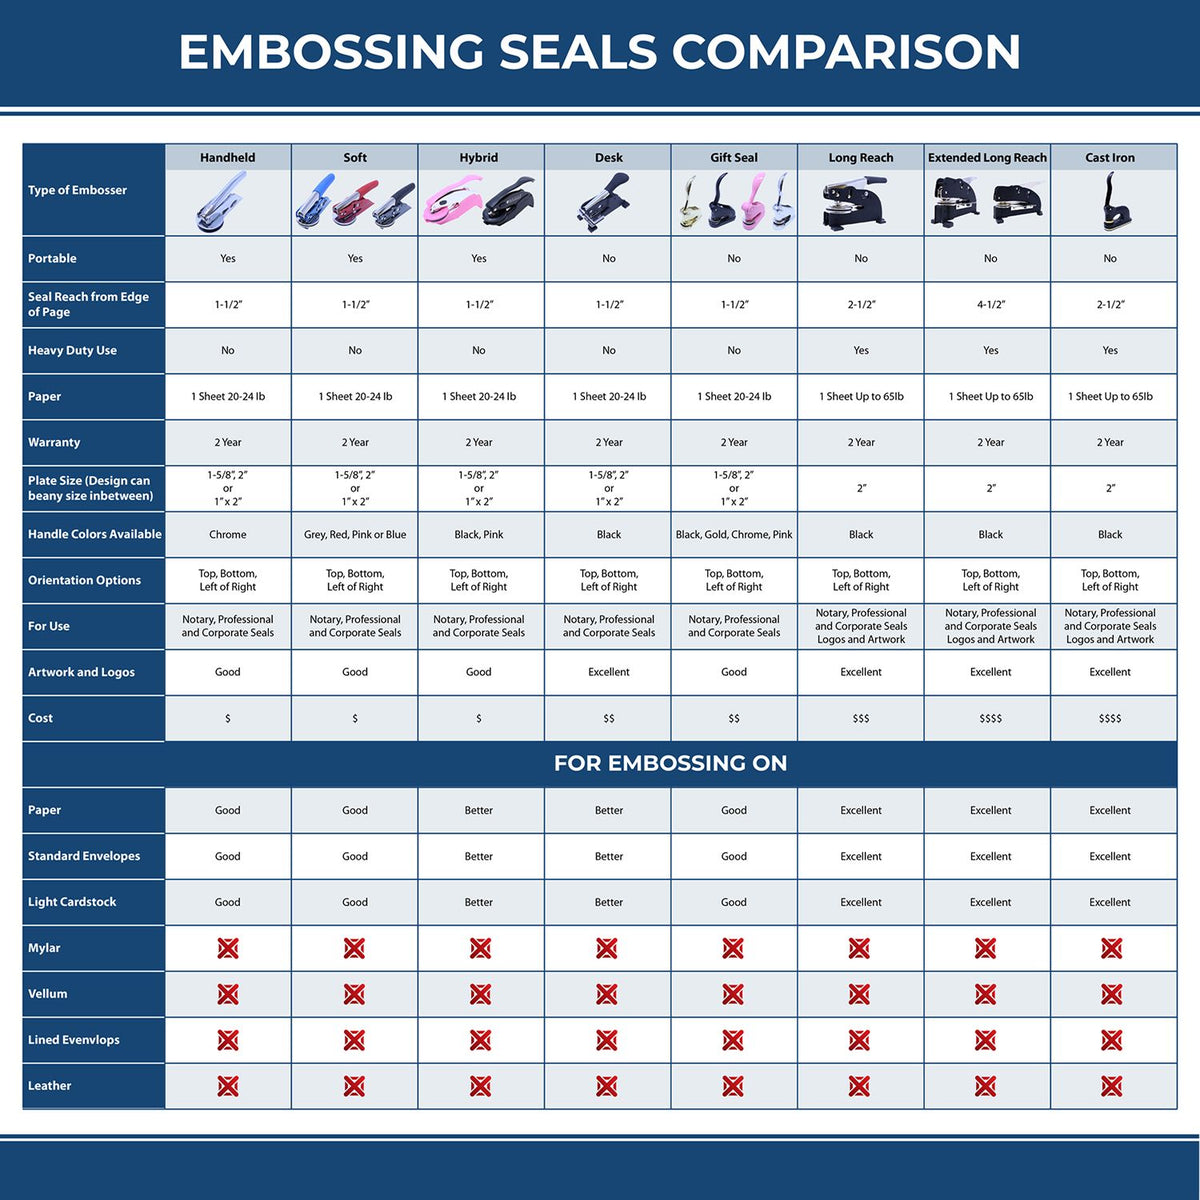 A comparison chart for the different types of mount models available for the Heavy Duty Cast Iron Hawaii Land Surveyor Seal Embosser.